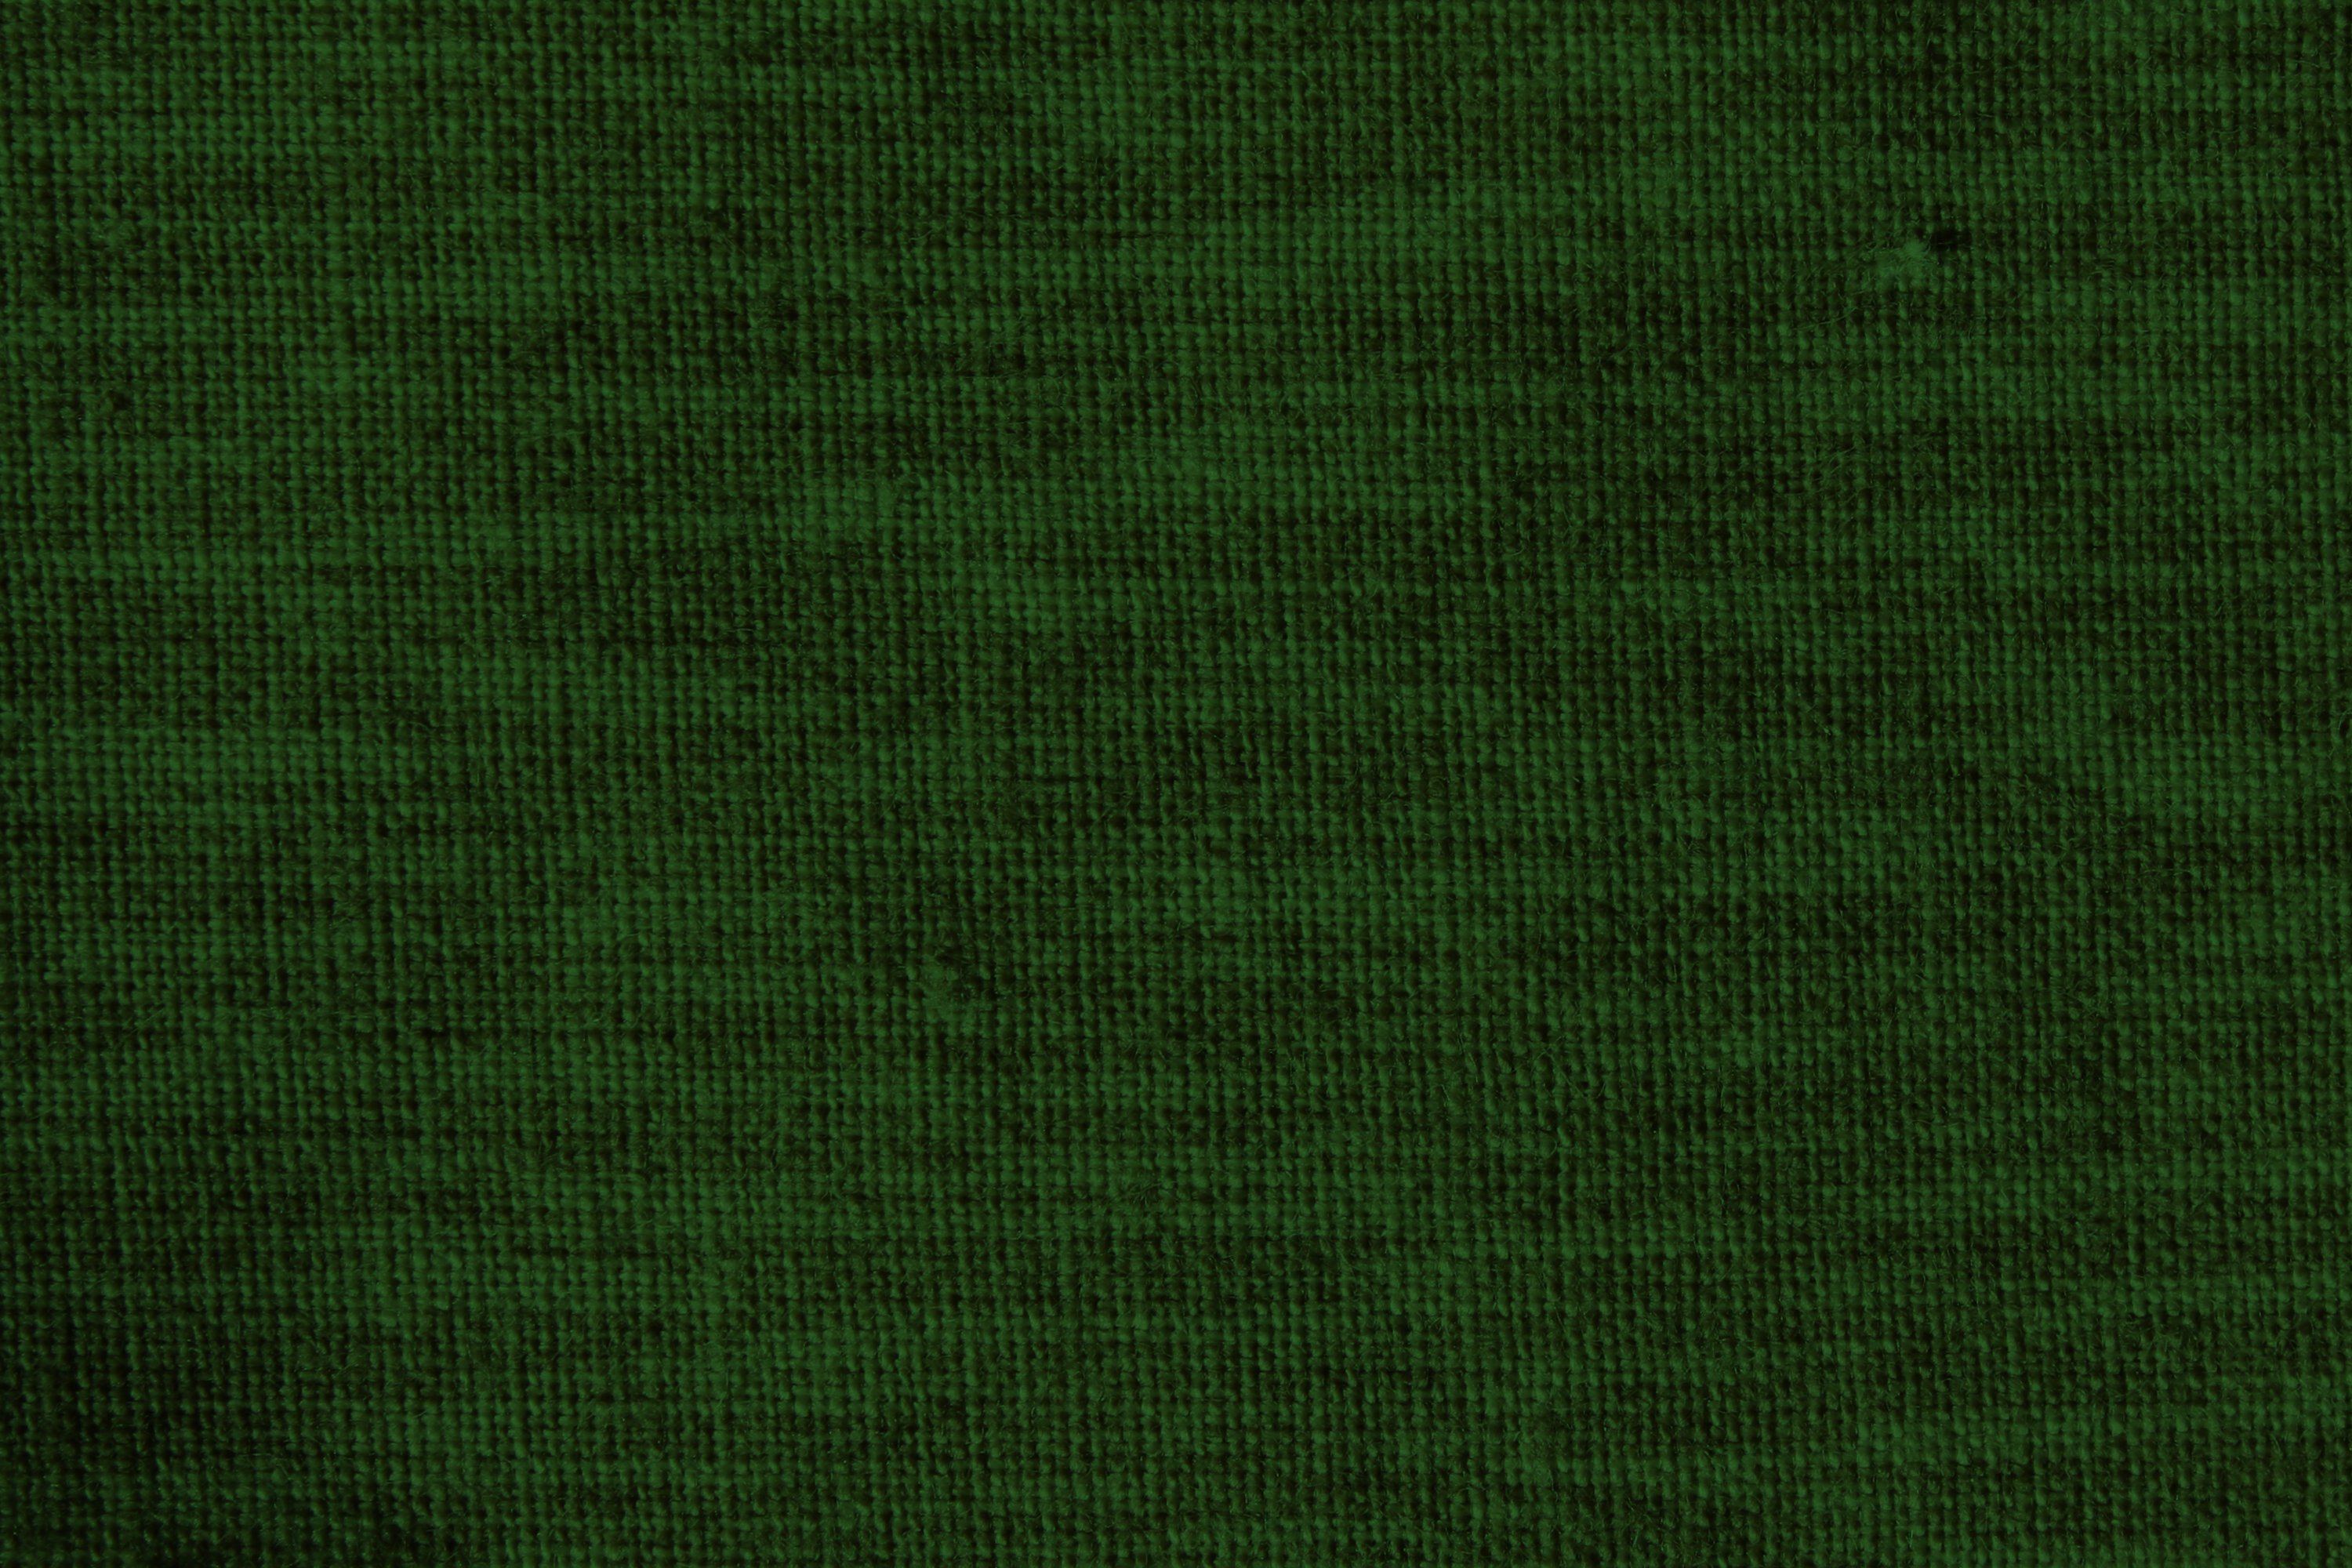 Forest Green Woven Fabric Close Up Texture Picture Photograph